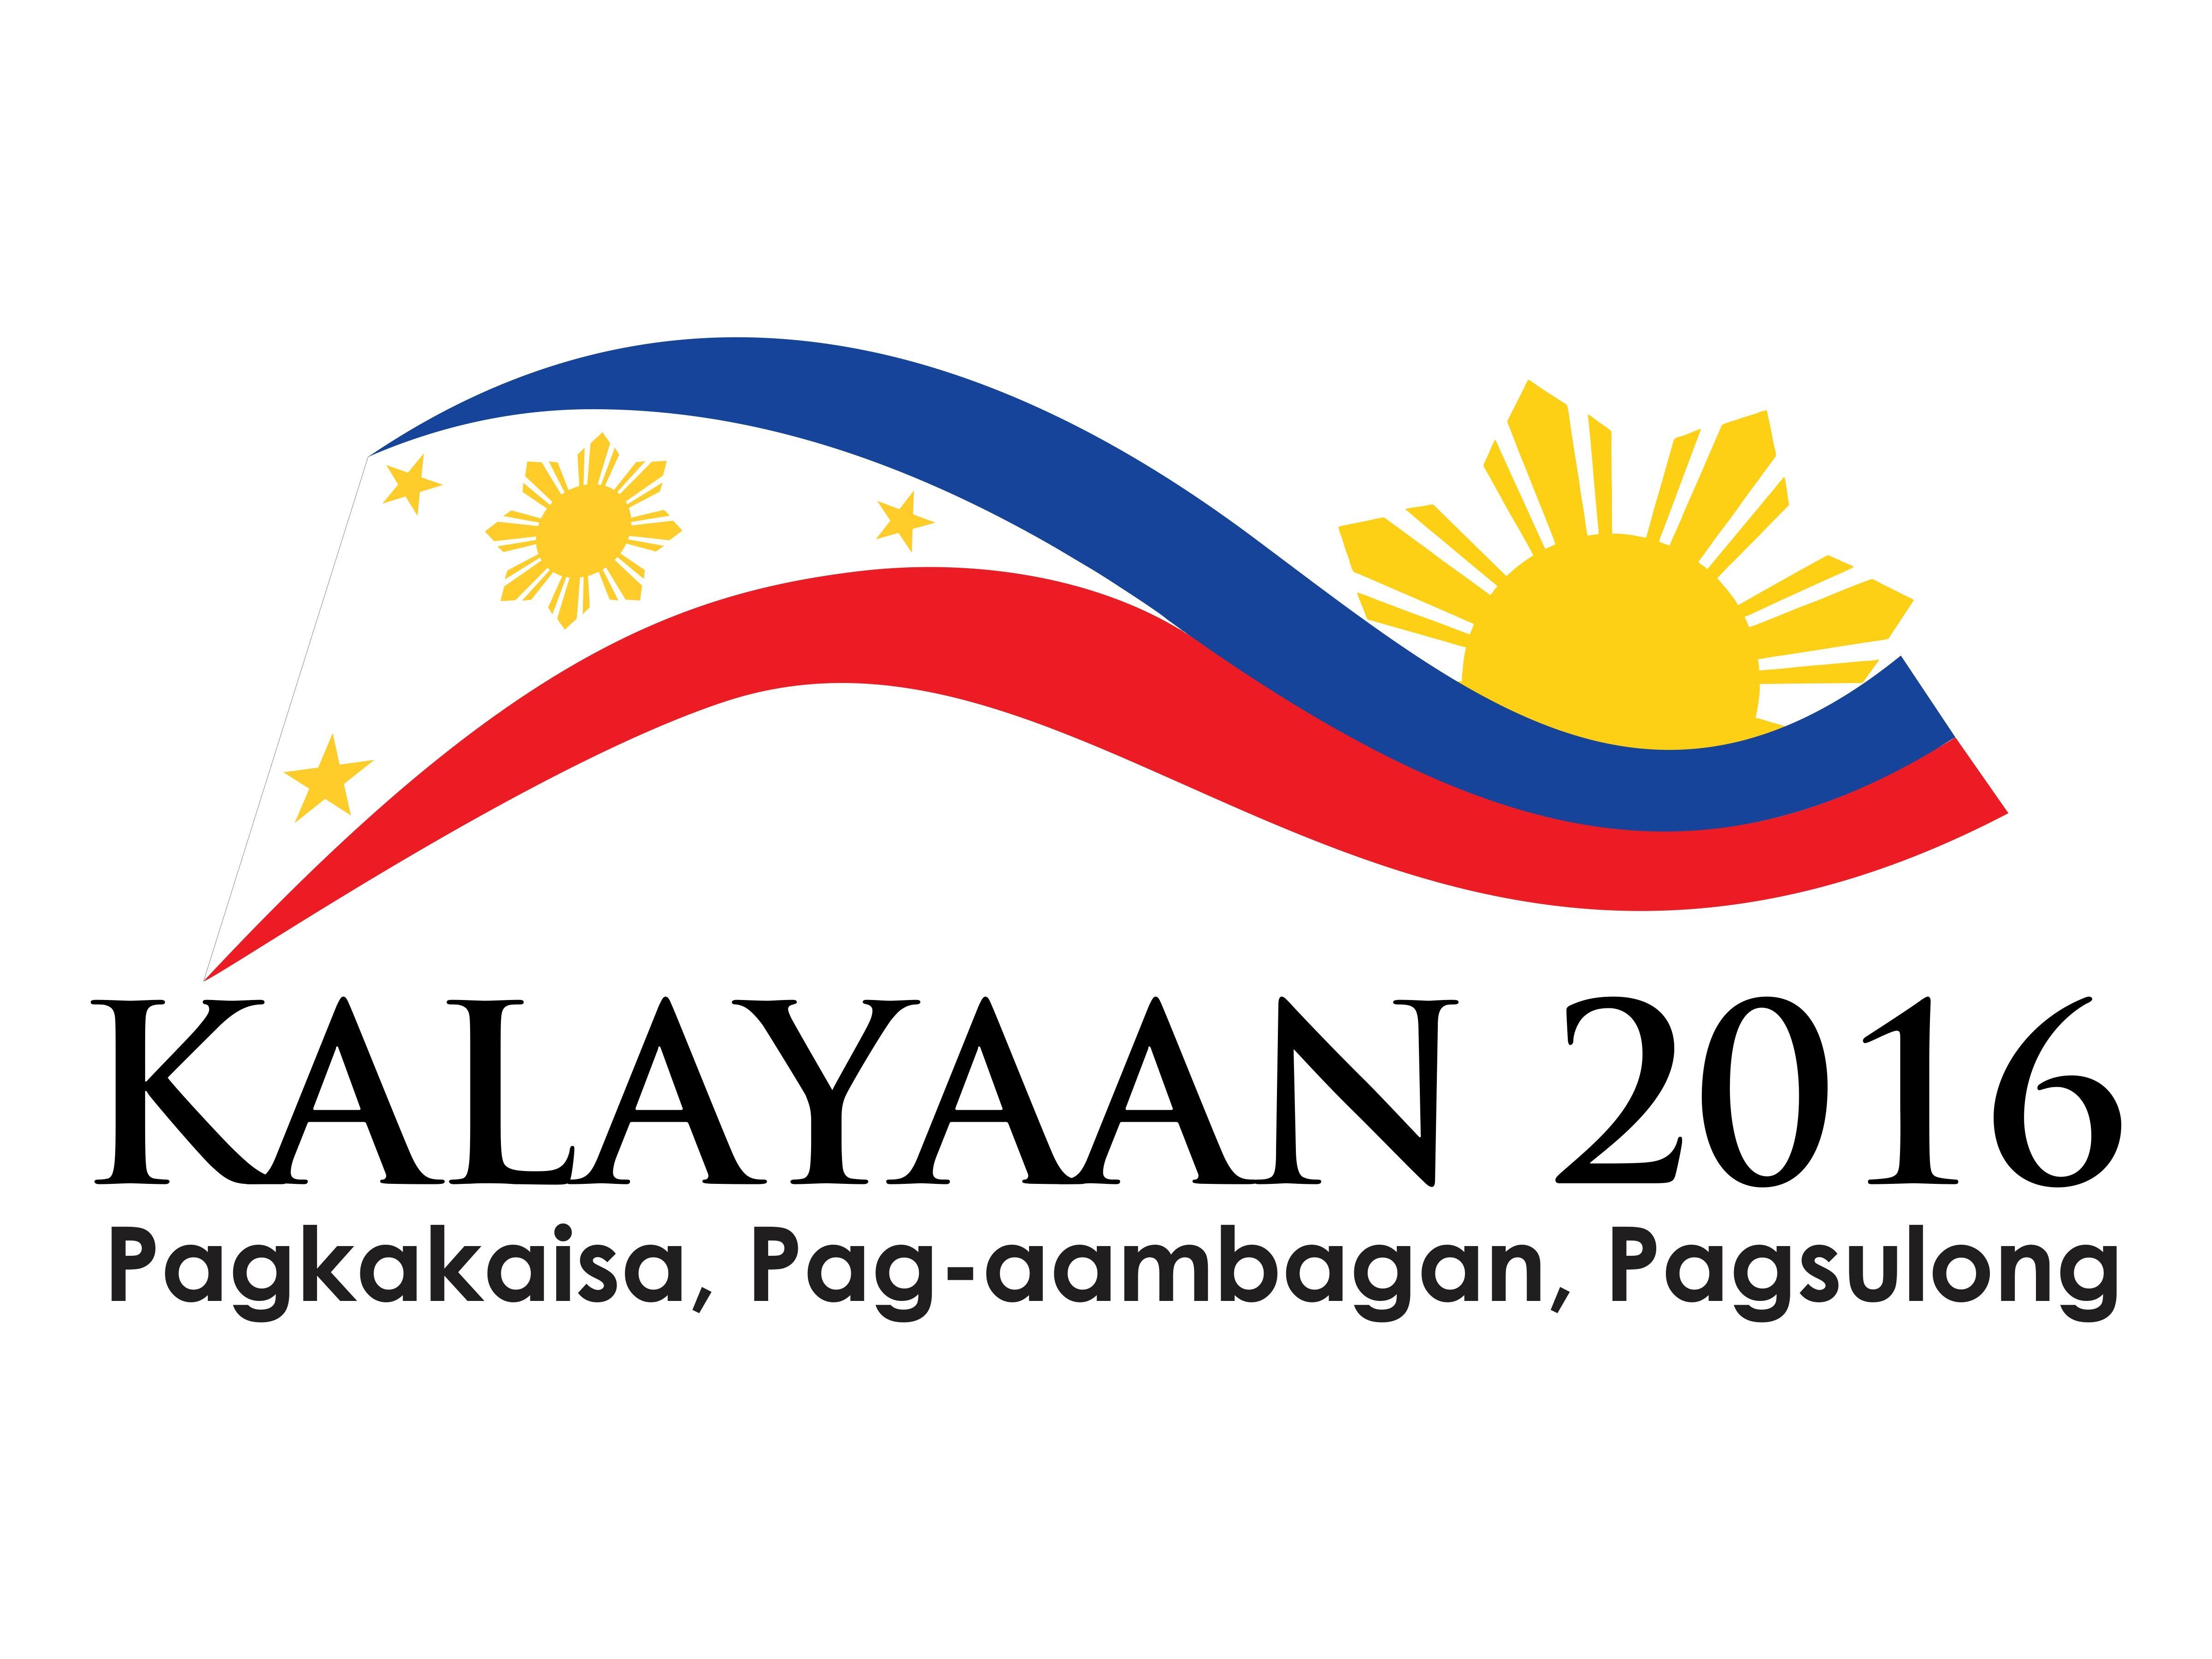 Independence Logo - Interesting Facts about Philippine Independence Day